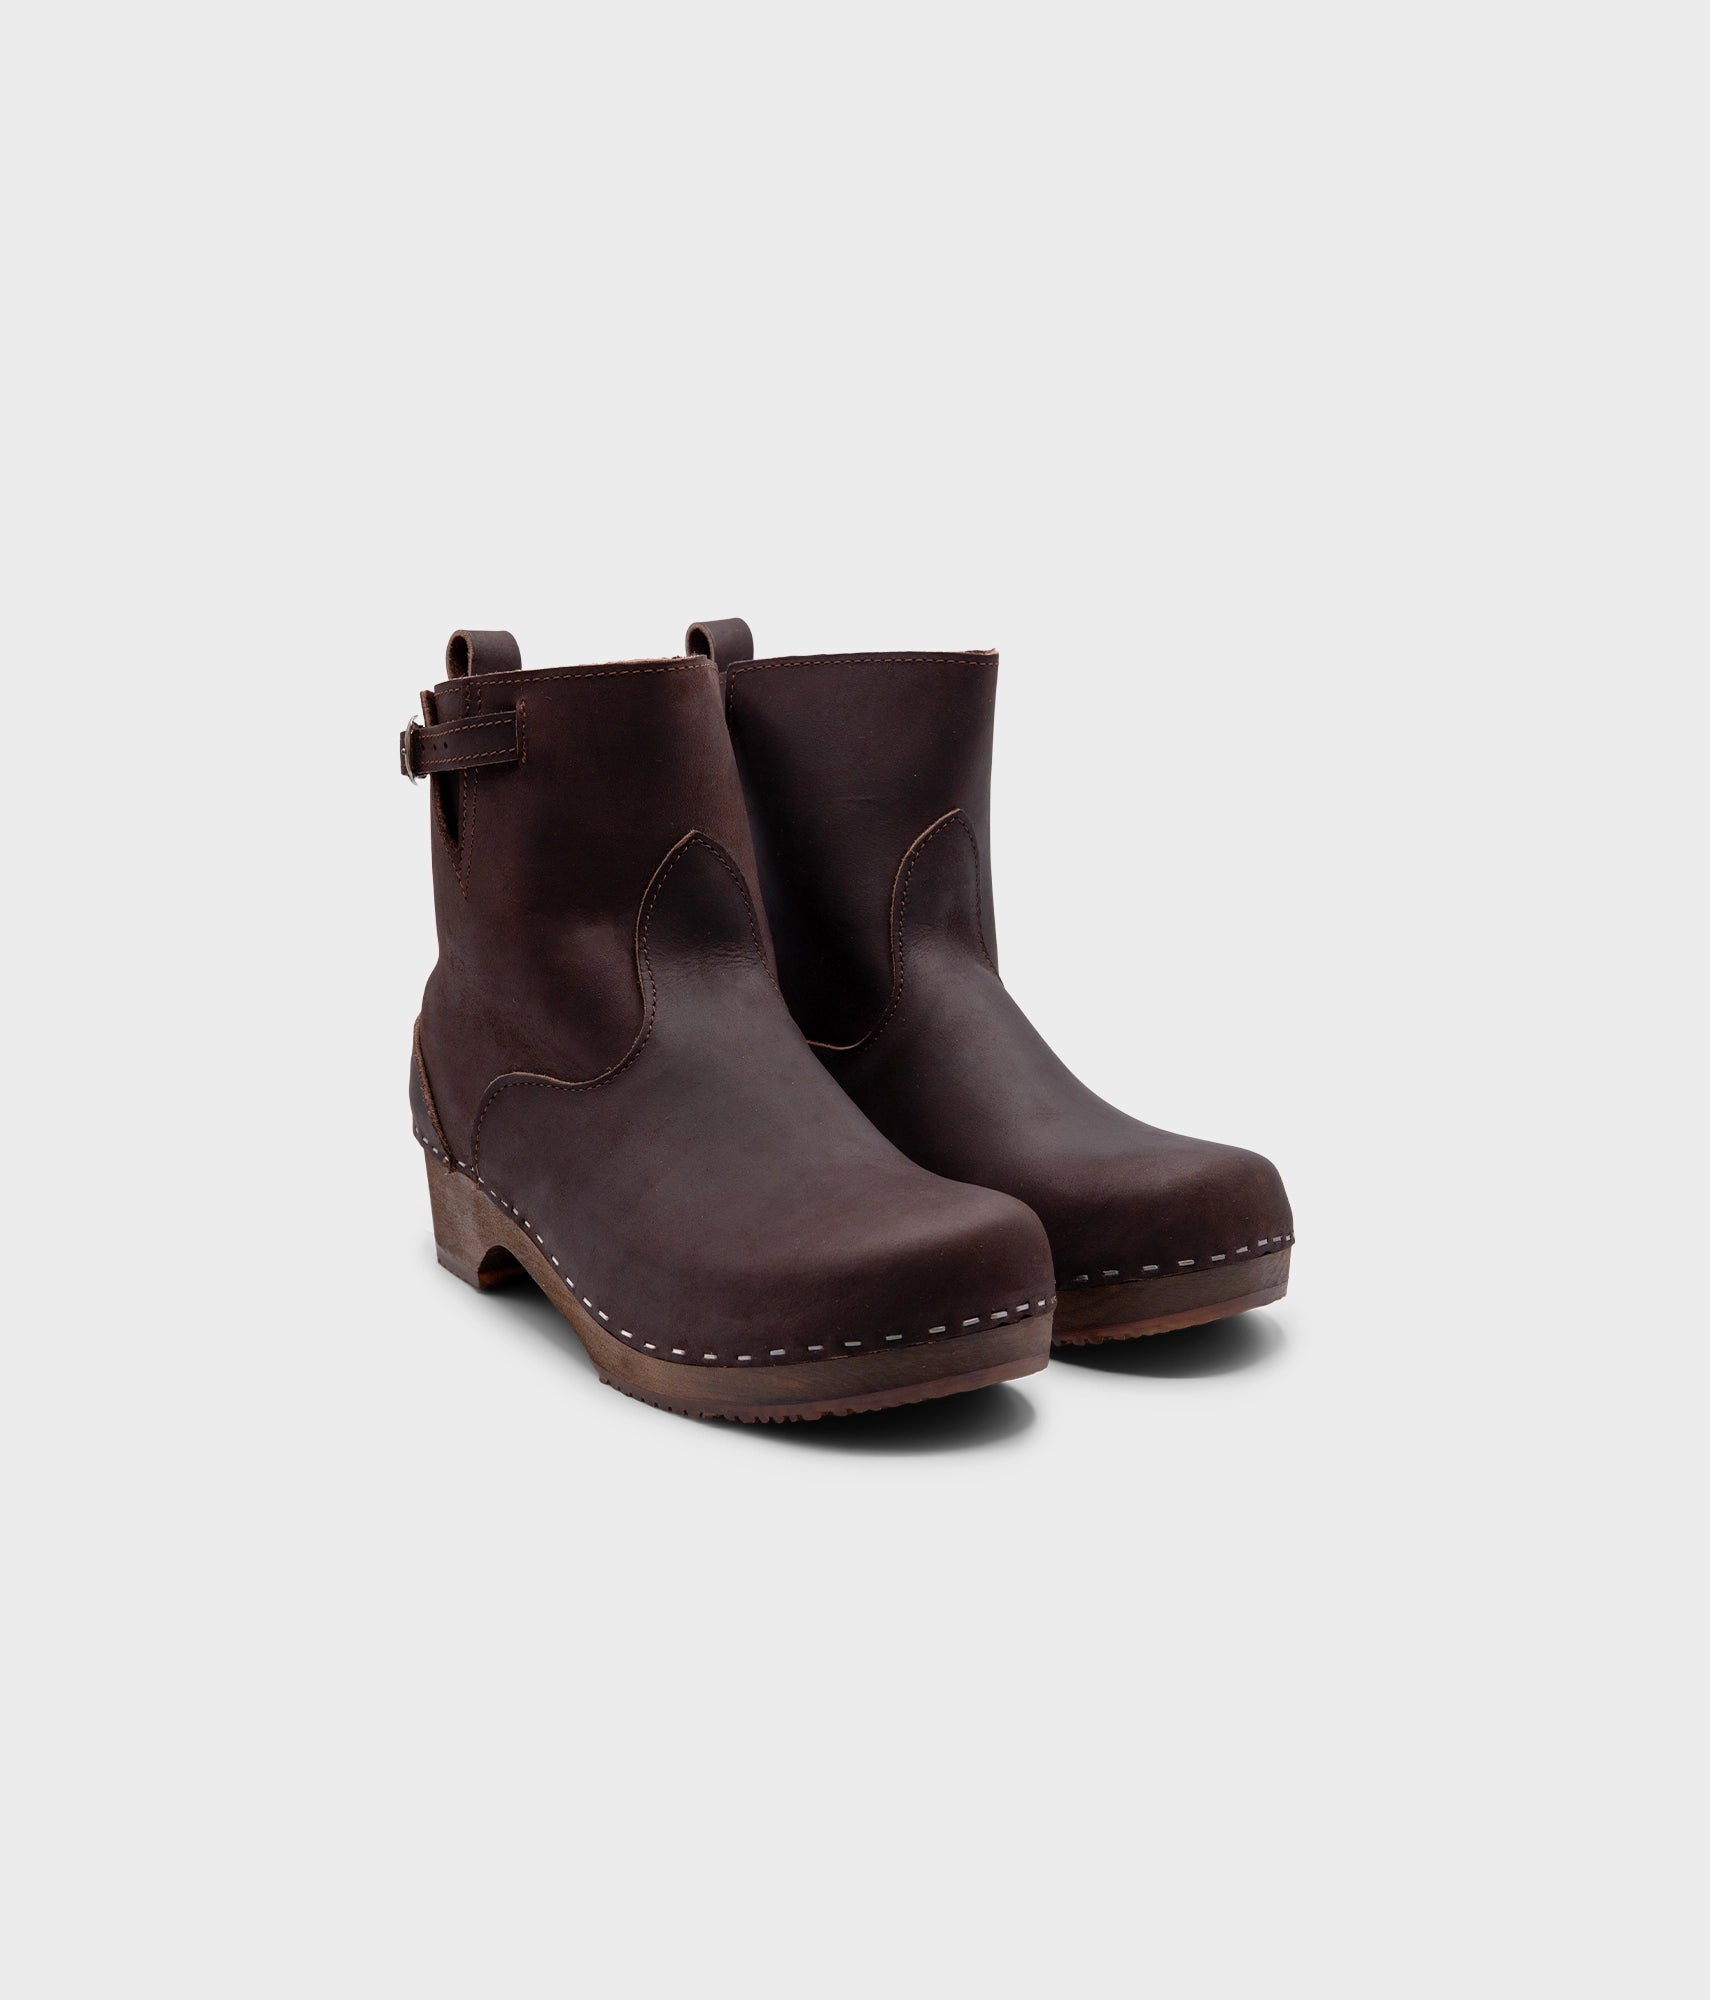 low heeled clog boots in dark brown nubuck leather with a mid-shaft and silver buckle, stapled on a dark wooden base